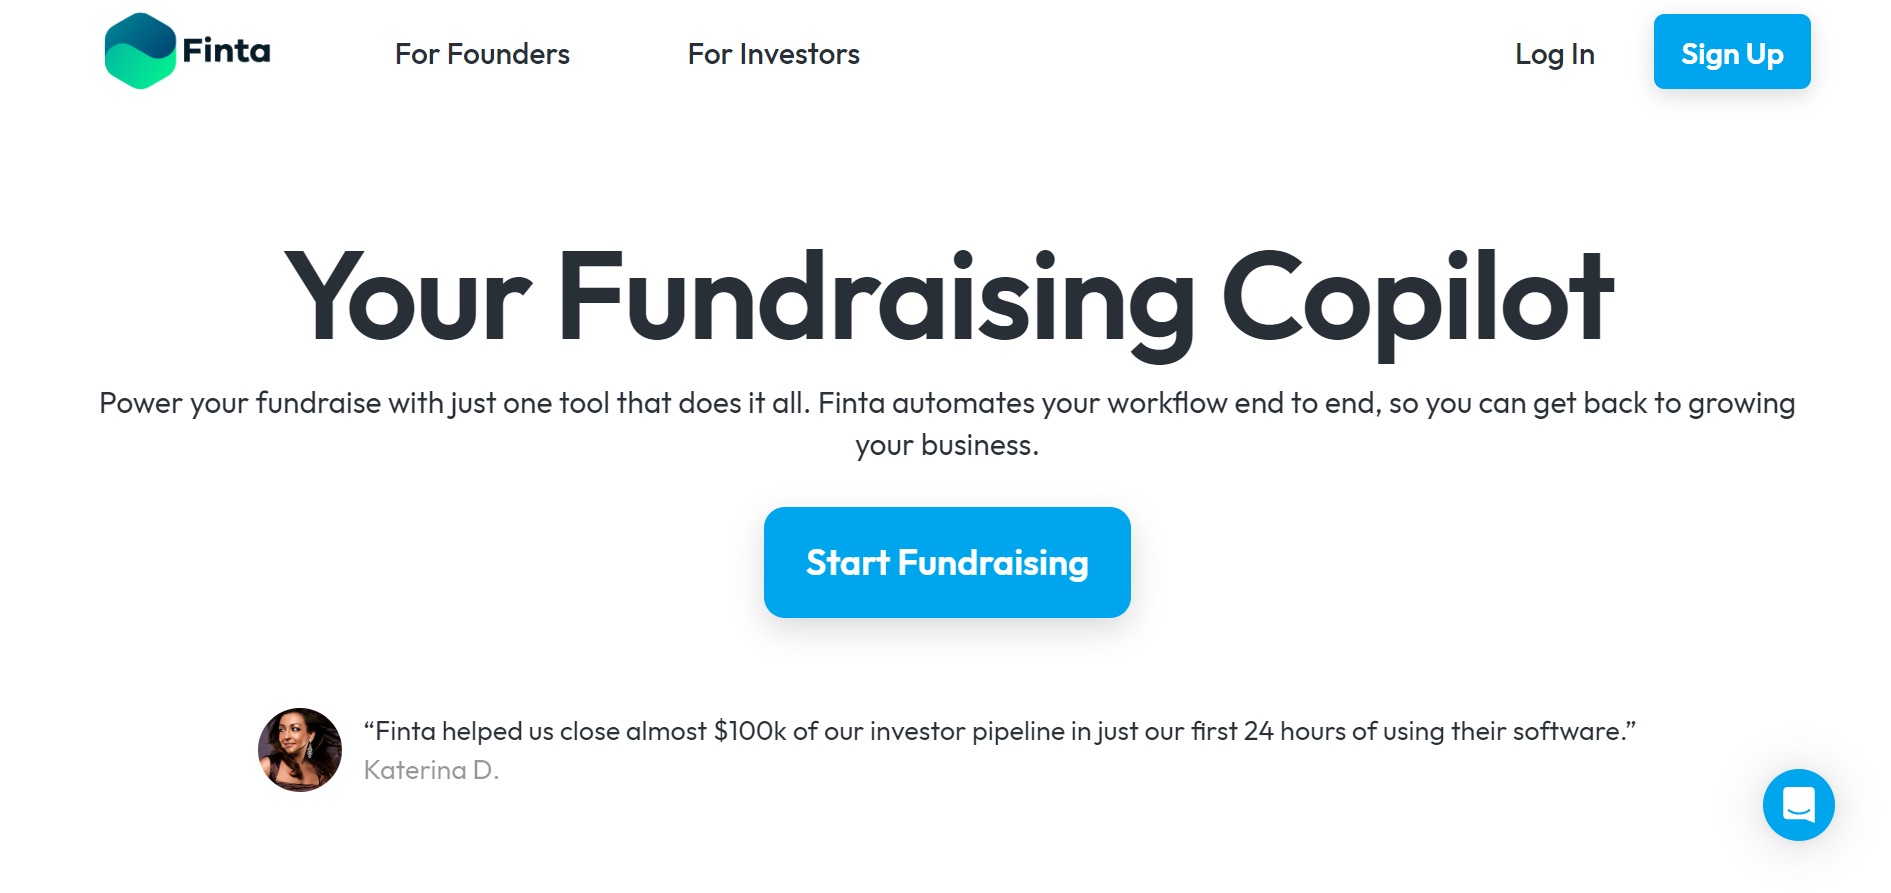 Take Your Fundraising to the Next Level with TrustFinta.com!